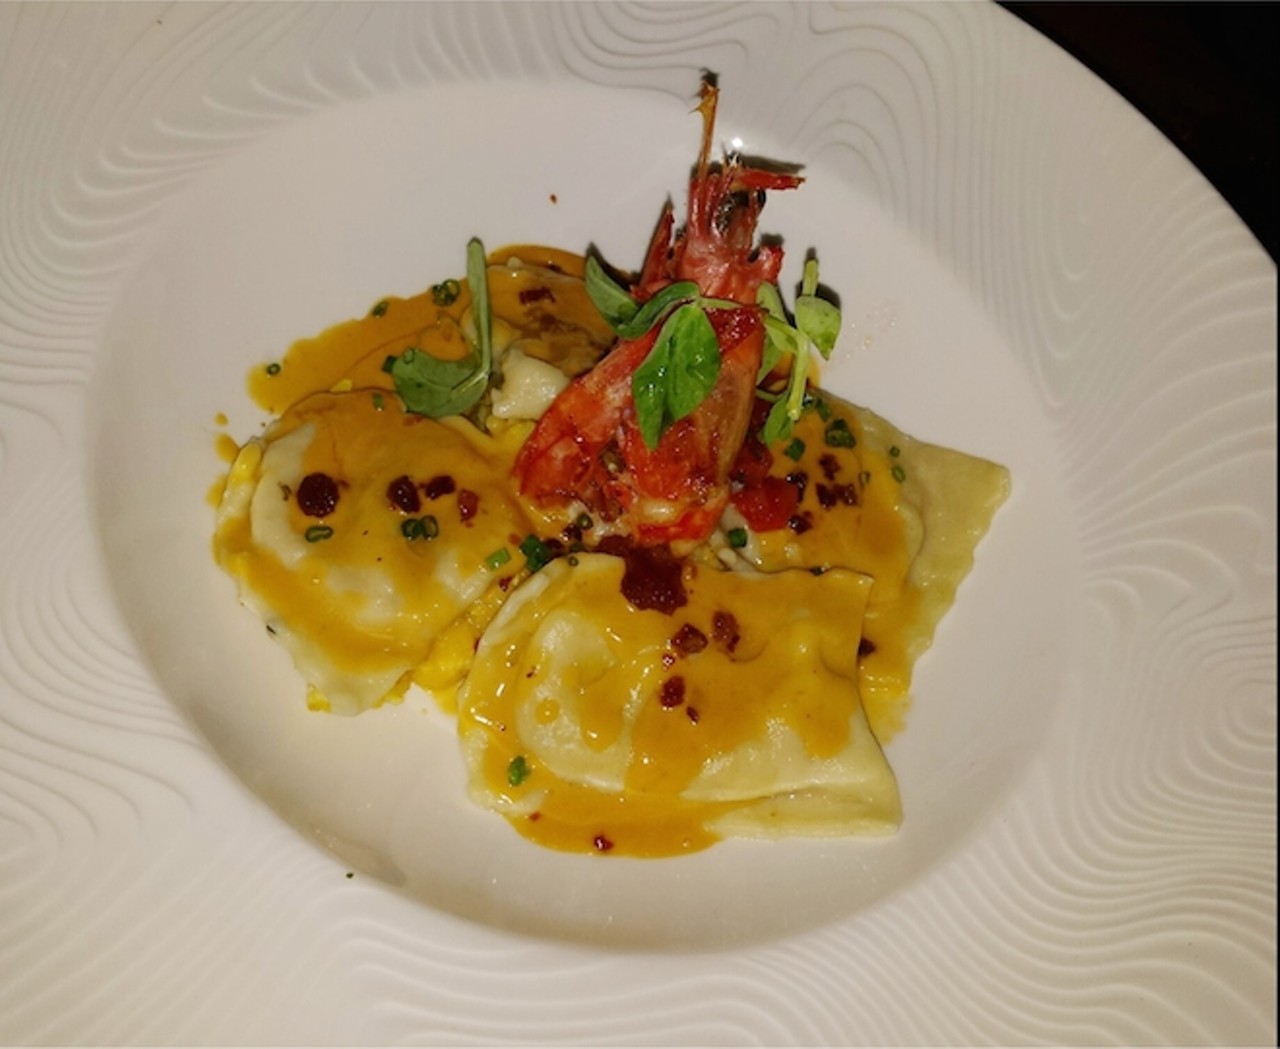 Hand-Made Canaveral "Shrimp and Grits" Ravioli
(Andouille Sausage, Tomatoes, Veloute)